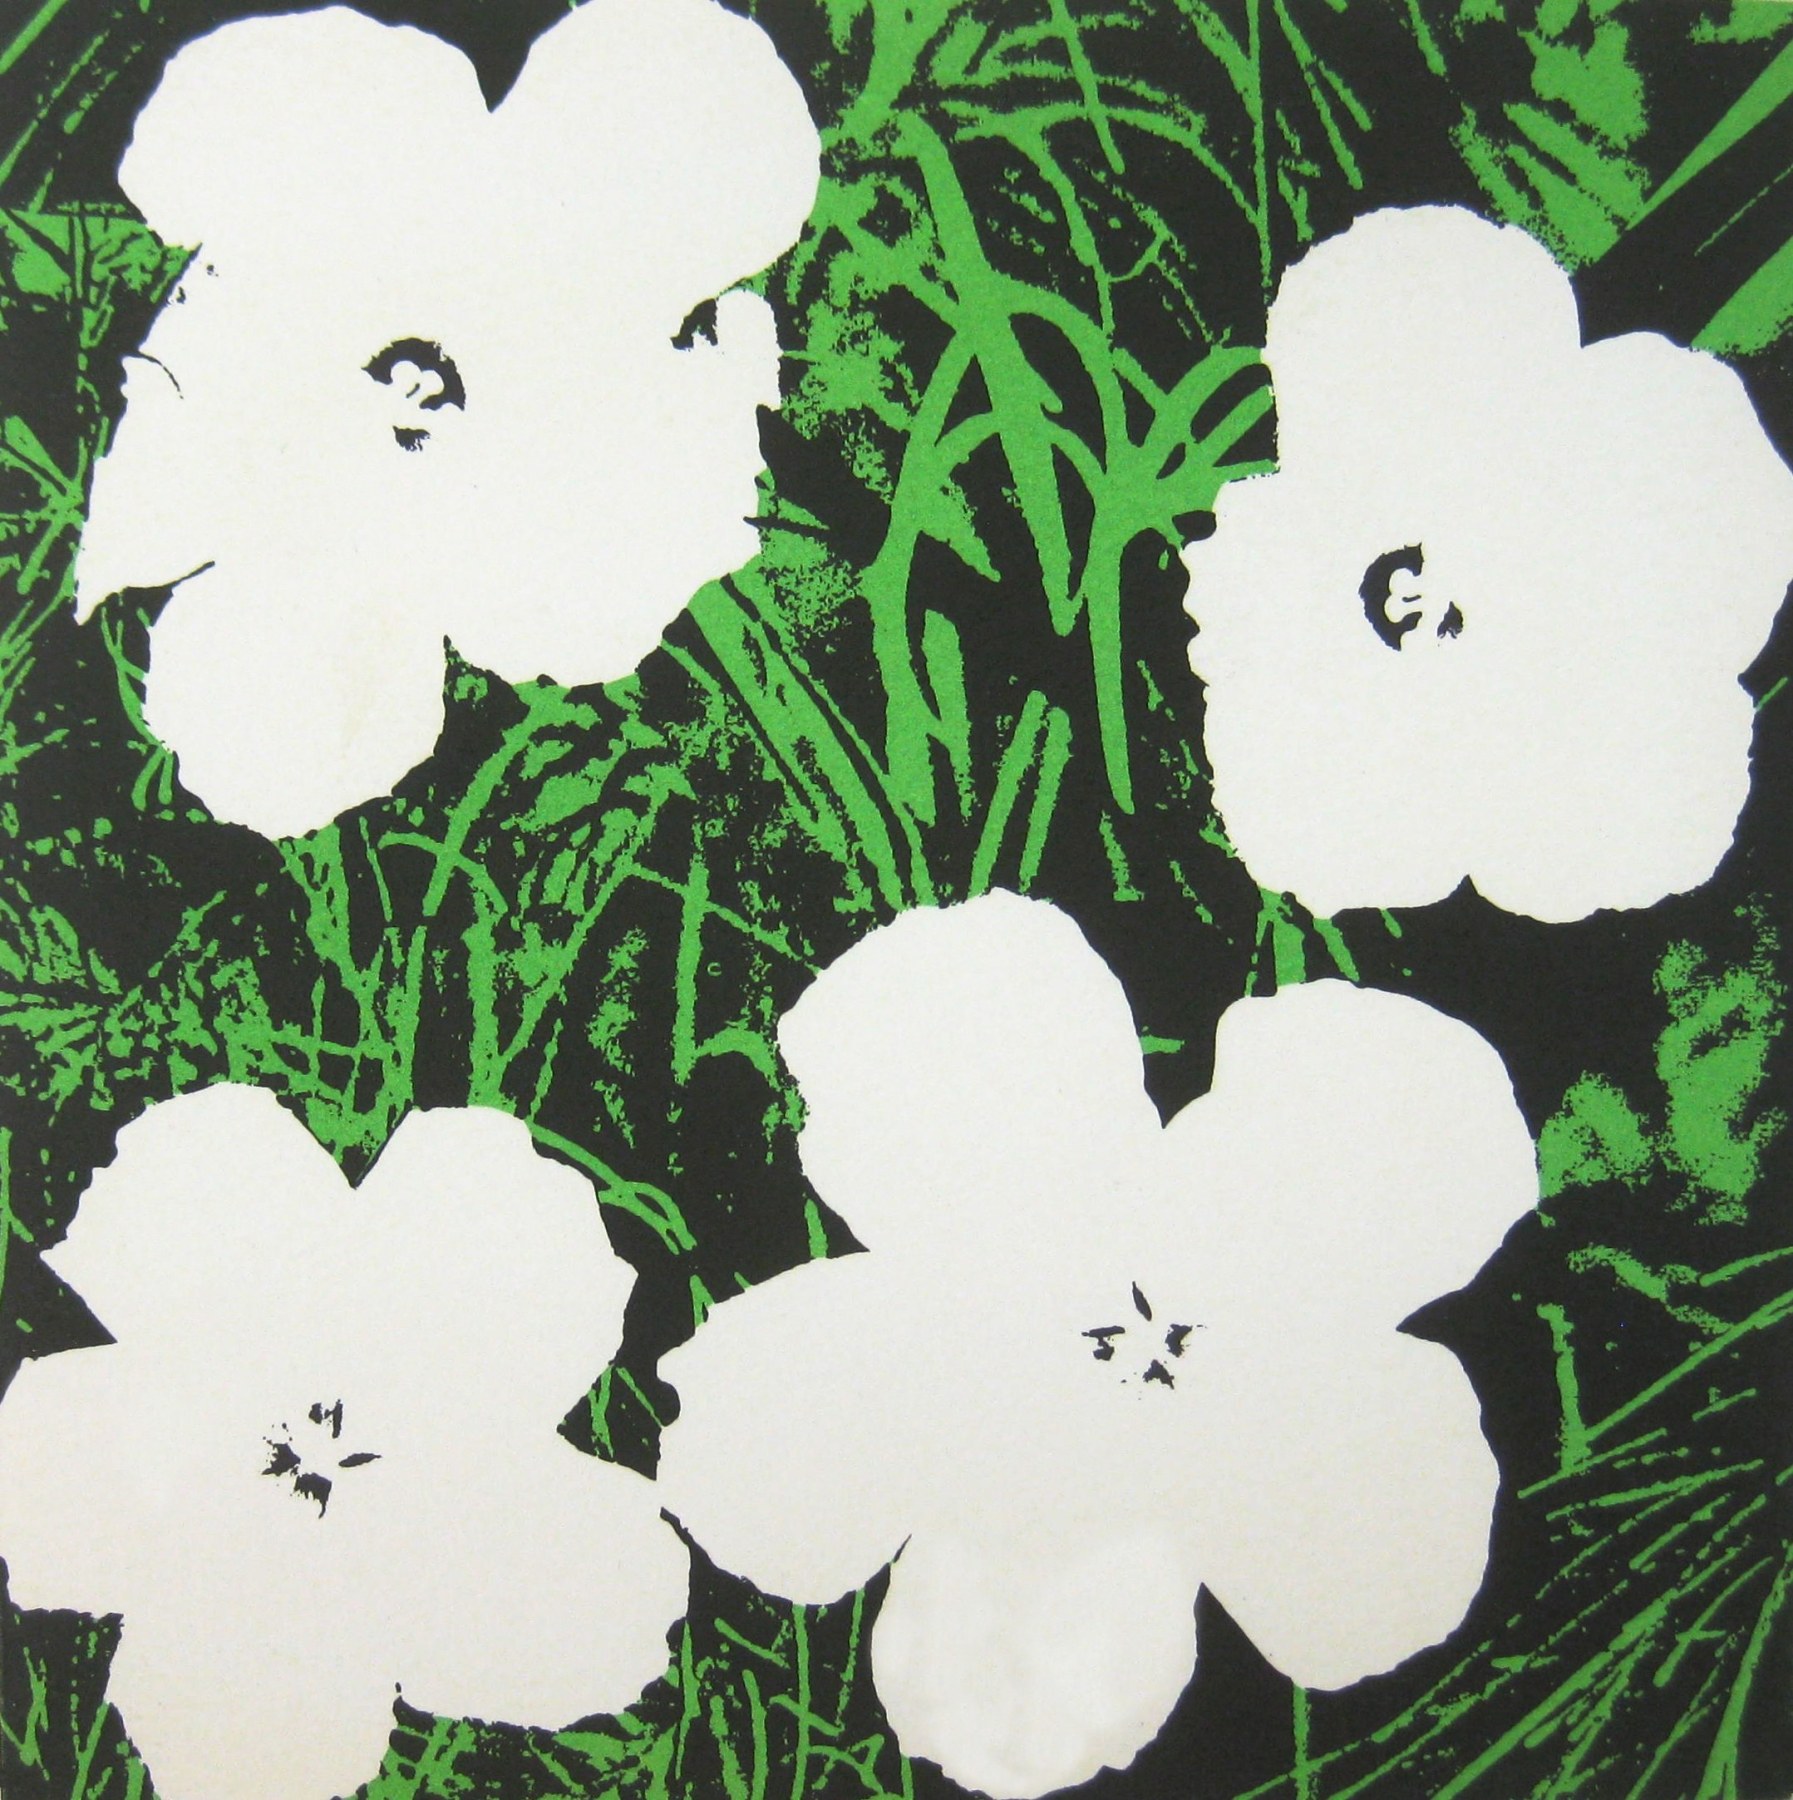 ANDY WARHOL. &quot;Flowers (MoMA)&quot;. 1965. Image courtesy of Alden Projects&trade;, New York